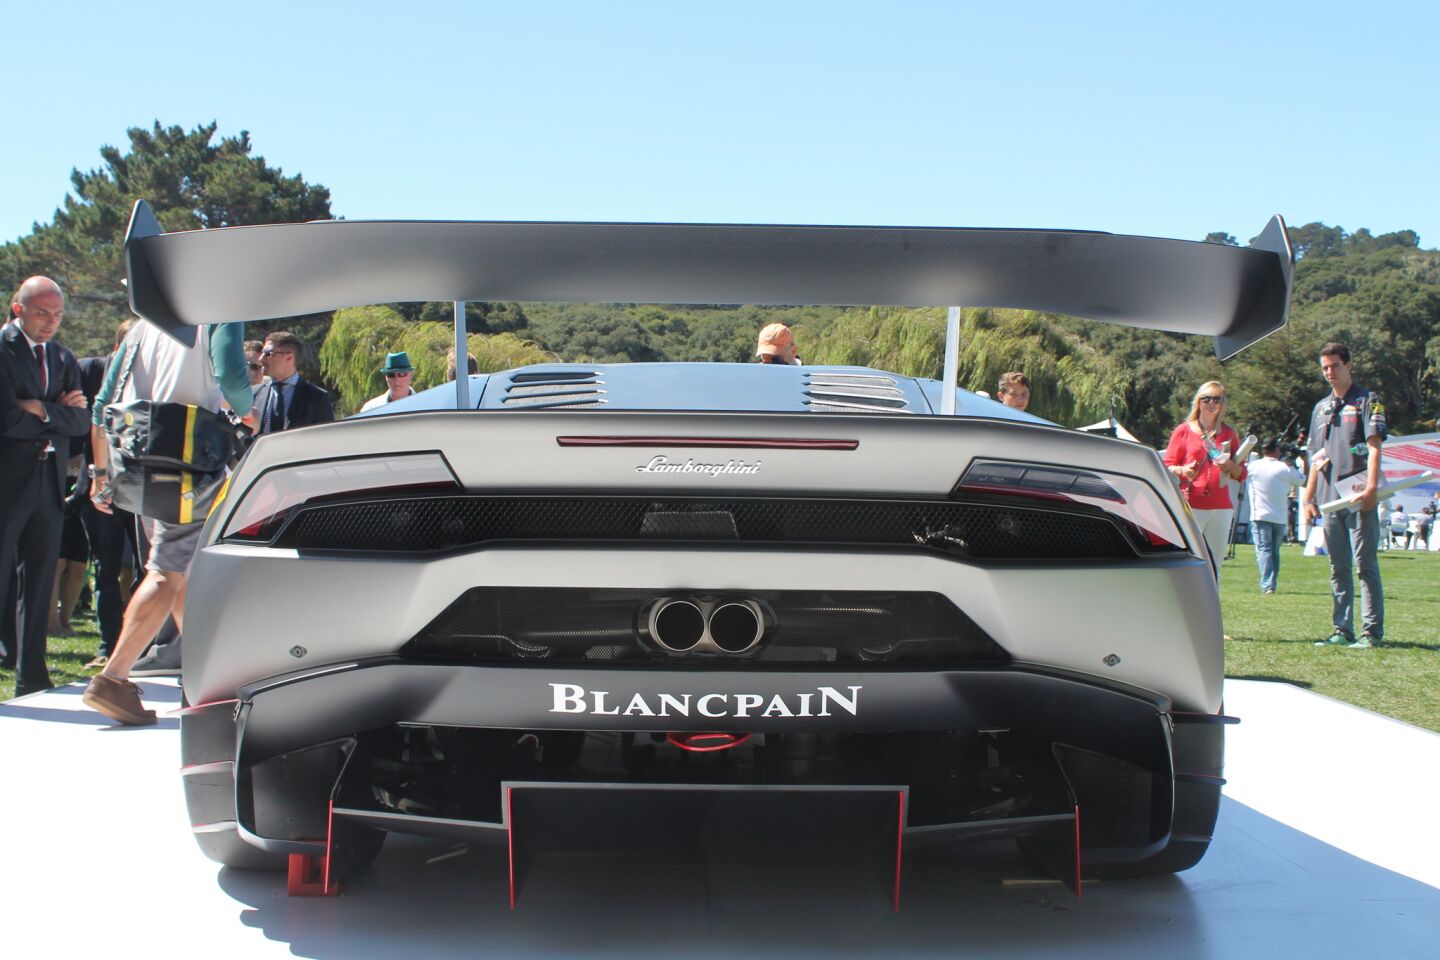 Lamborghini announced its all-new Huracan Super Trofeo at the annual Quail Motorsports Gathering in Carmel, Calif. on Friday.